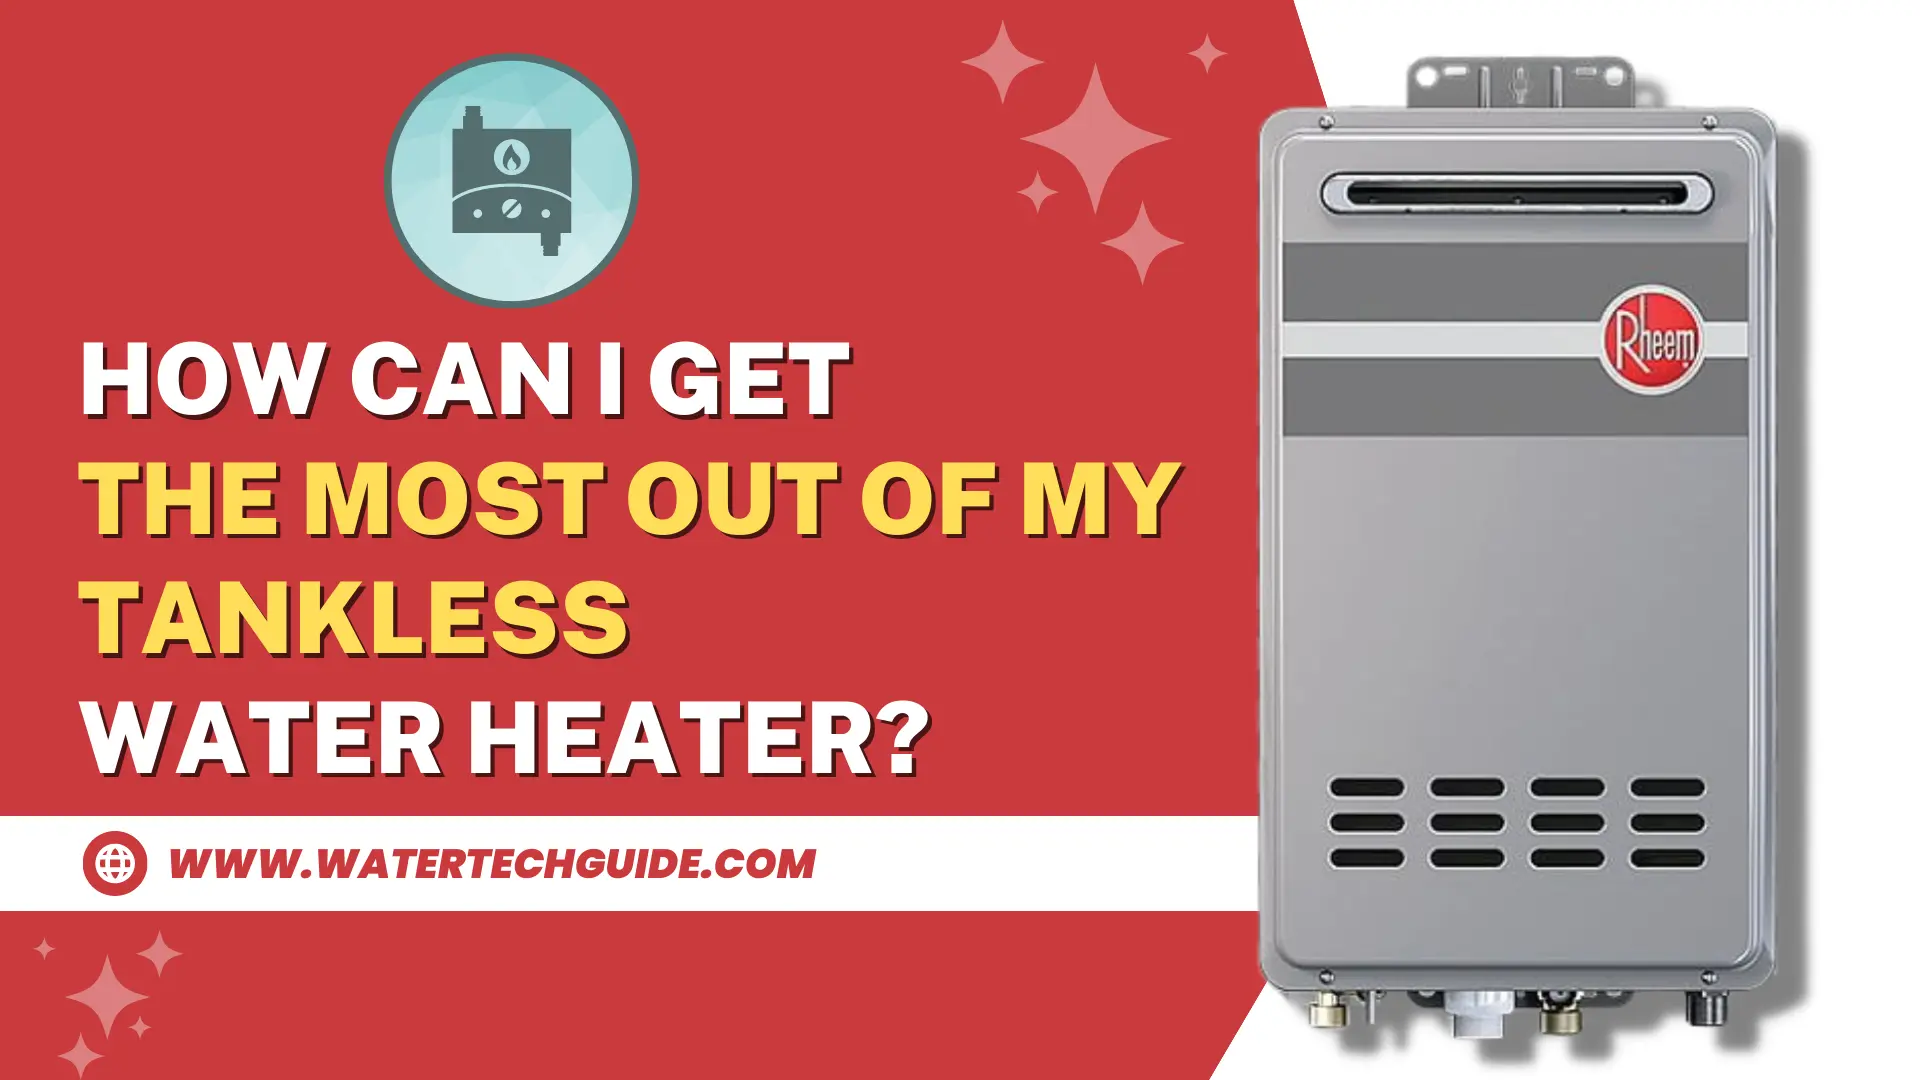 How Can I Get the Most Out of My Tankless Water Heater